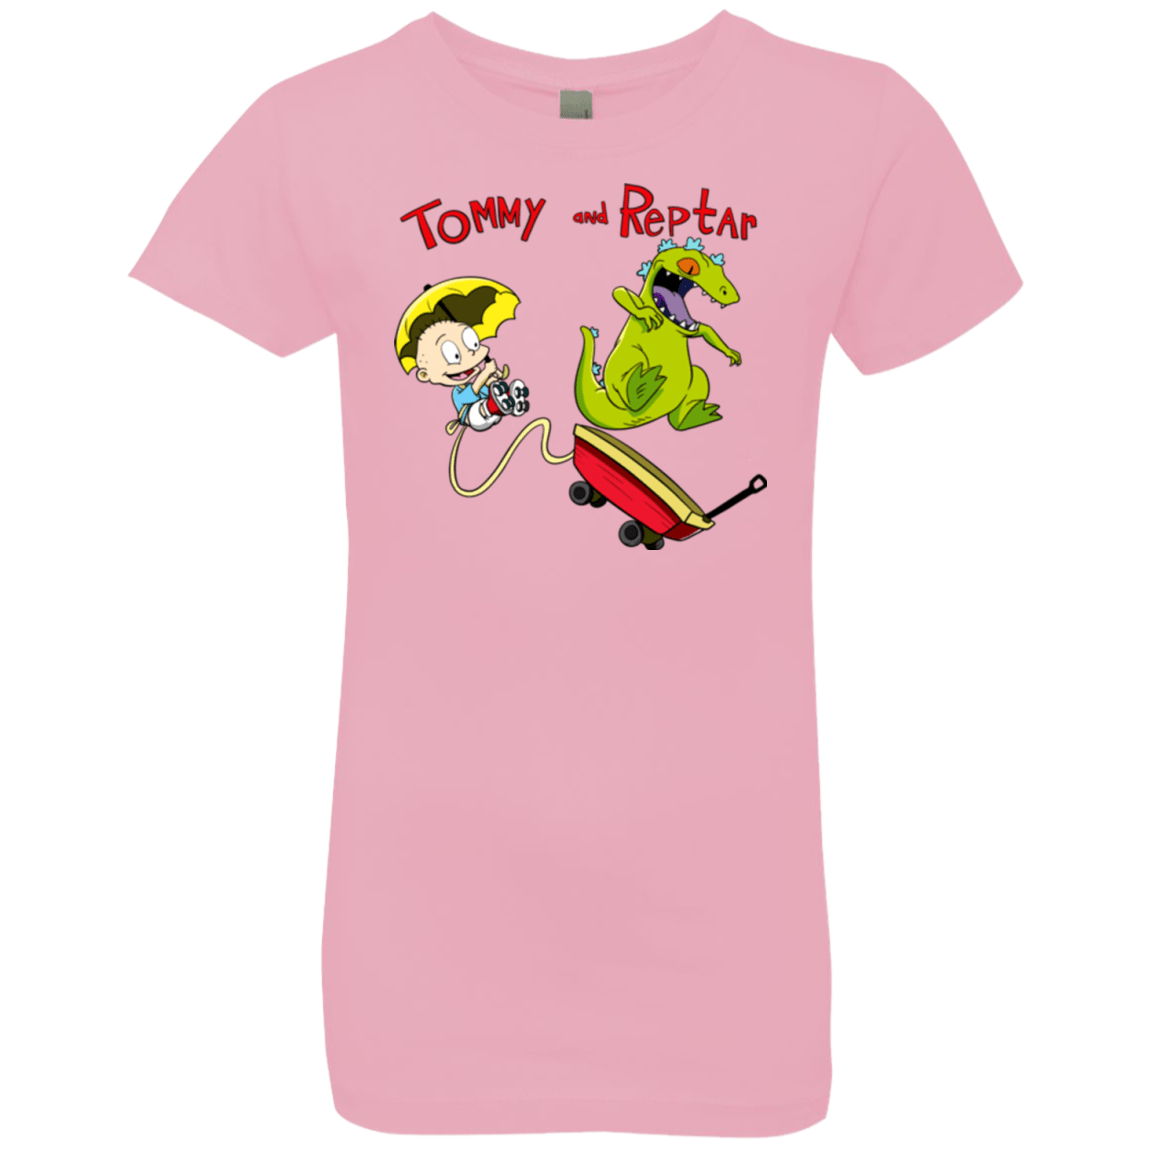 Tommy and Reptar Girls Premium T-Shirt